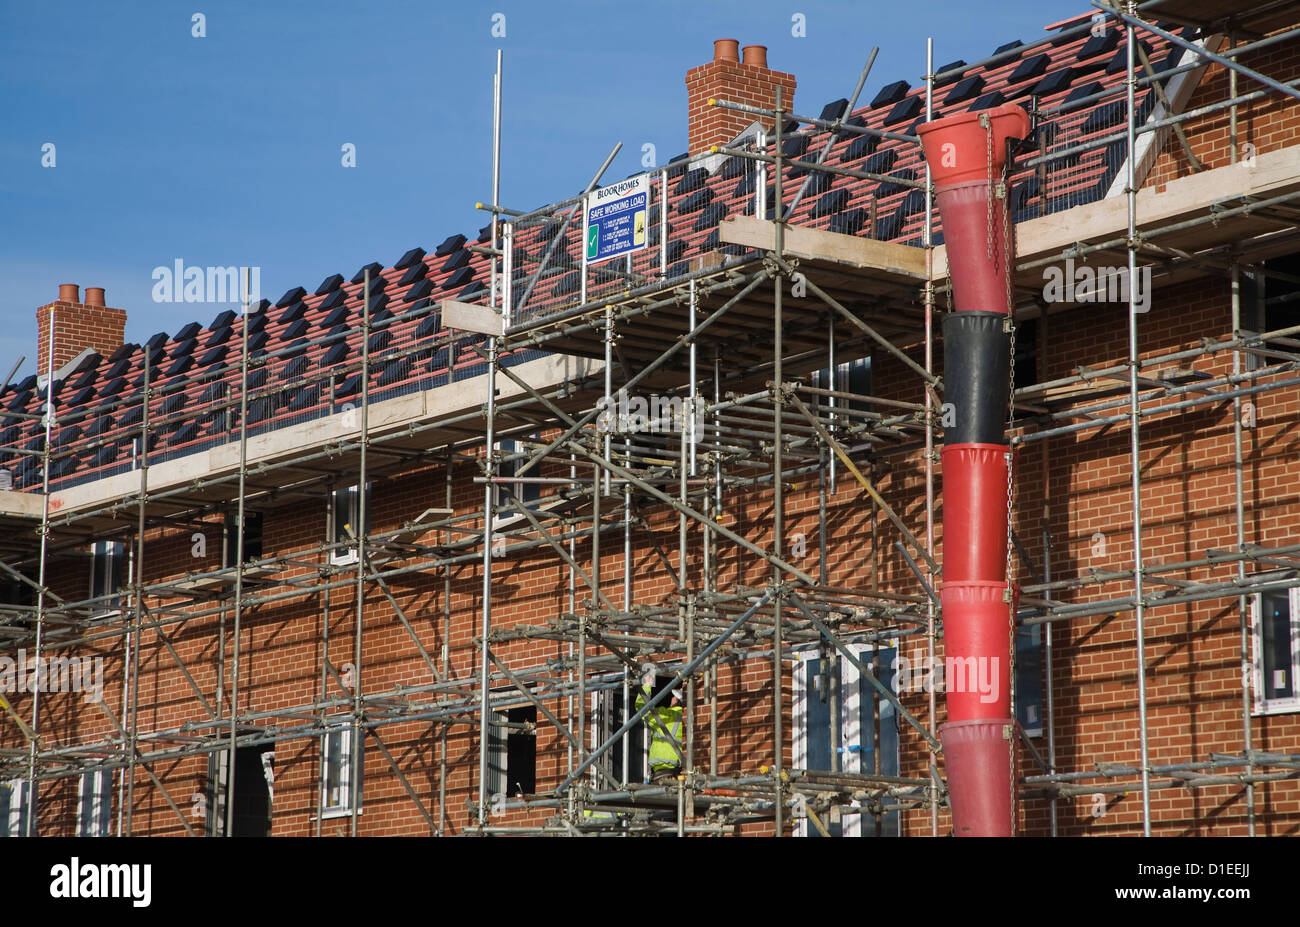 Scaffolding for roofing new homes Stock Photo